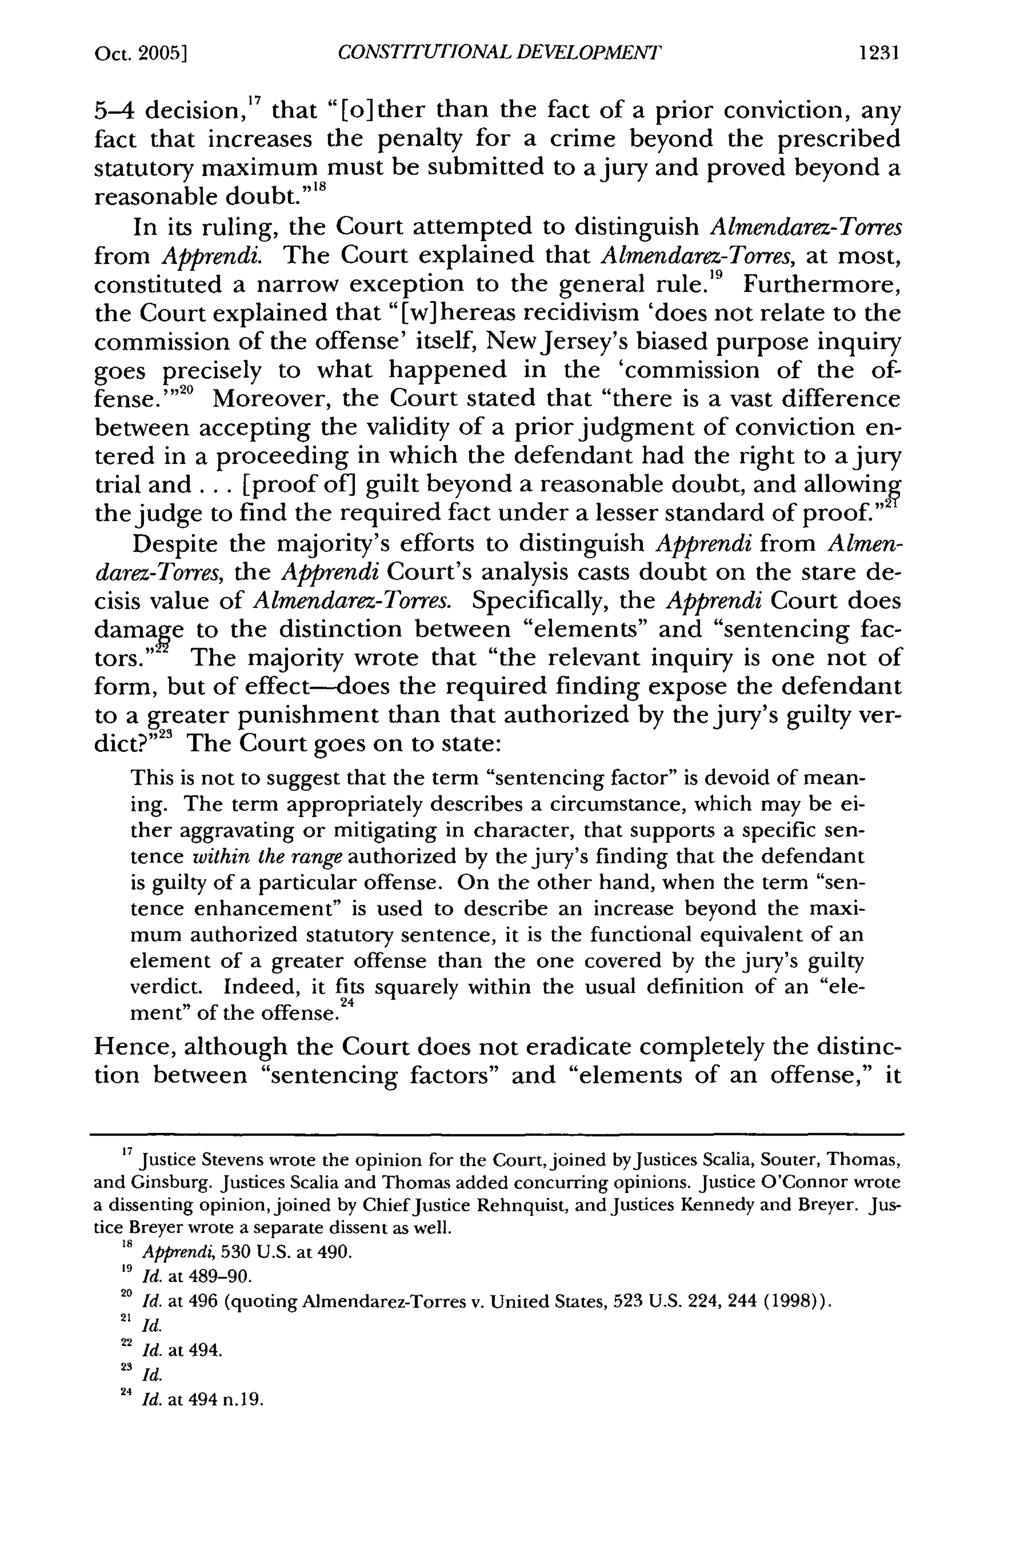 Oct. 2005] CONSTITUTIONAL DEVELOPMENT 5-4 decision, 17 that "[o]ther than the fact of a prior conviction, any fact that increases the penalty for a crime beyond the prescribed statutory maximum must